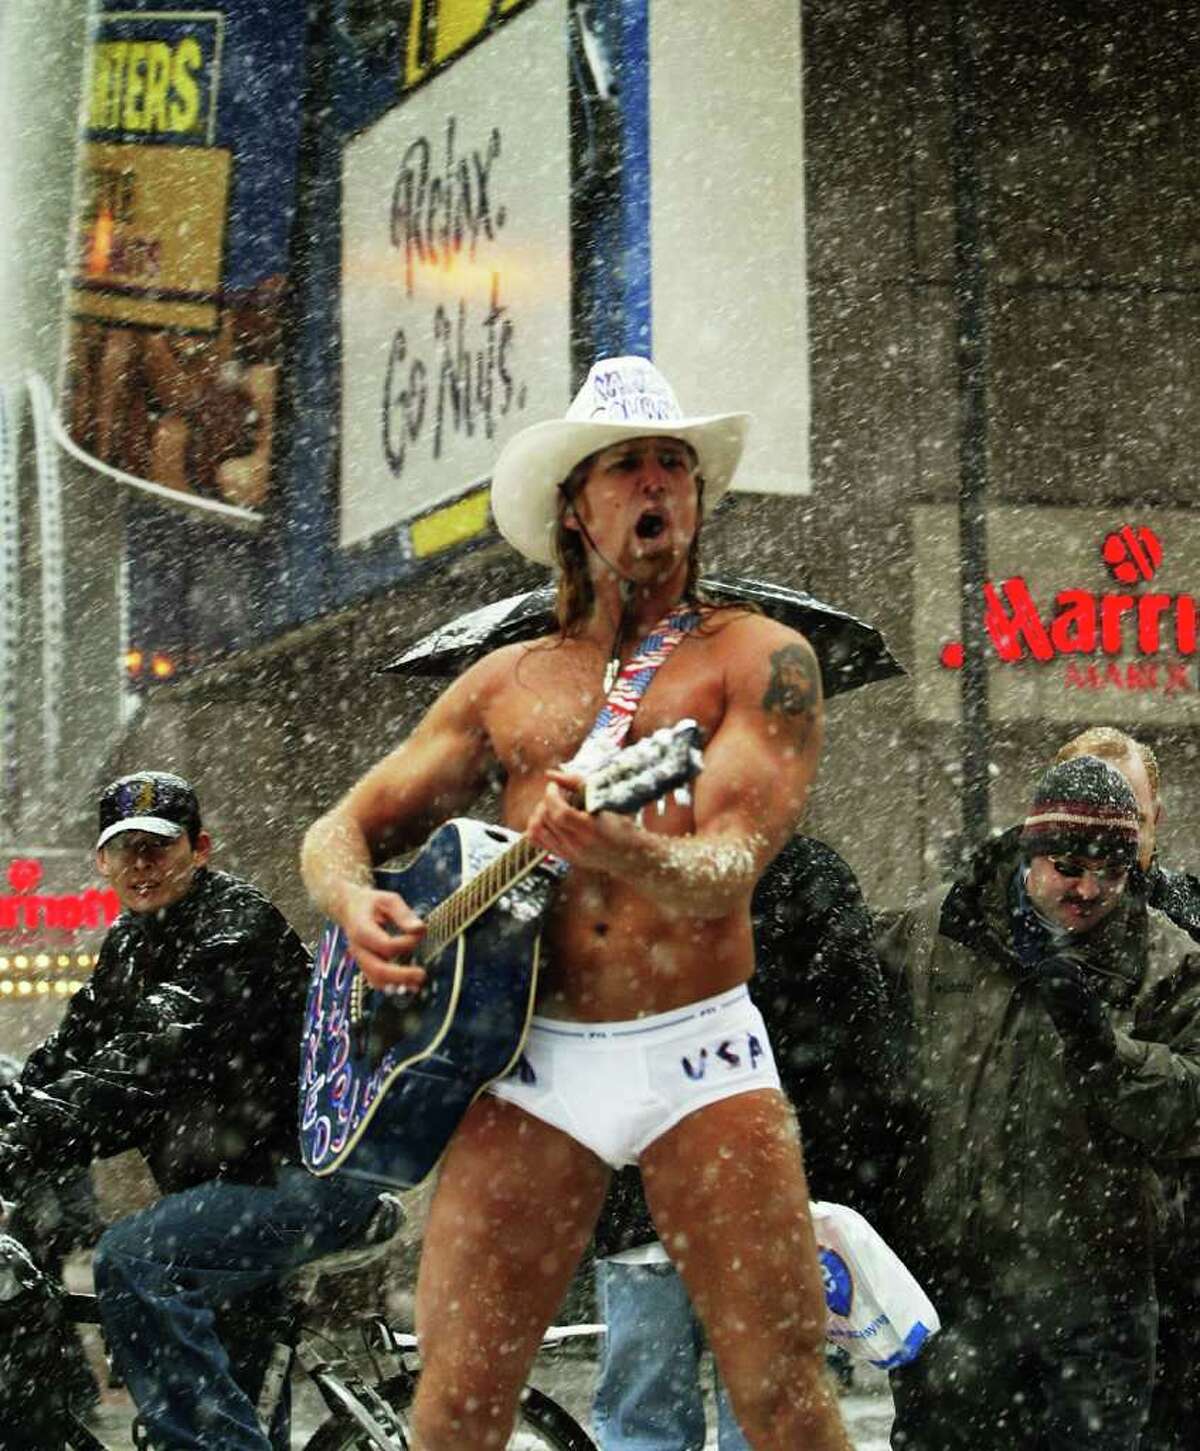 NEW YORK - DECEMBER 5: Robert John Burck, who calls himself "The Naked Cowboy" plays his guitar in Times Square December 5, 2002 in New York City. New York City may get up to eight inches of snow in an early East Coast storm that has closed schools throughout the area and left six people dead in traffic accidents. (Photo by Robert Giroux/Getty Images)